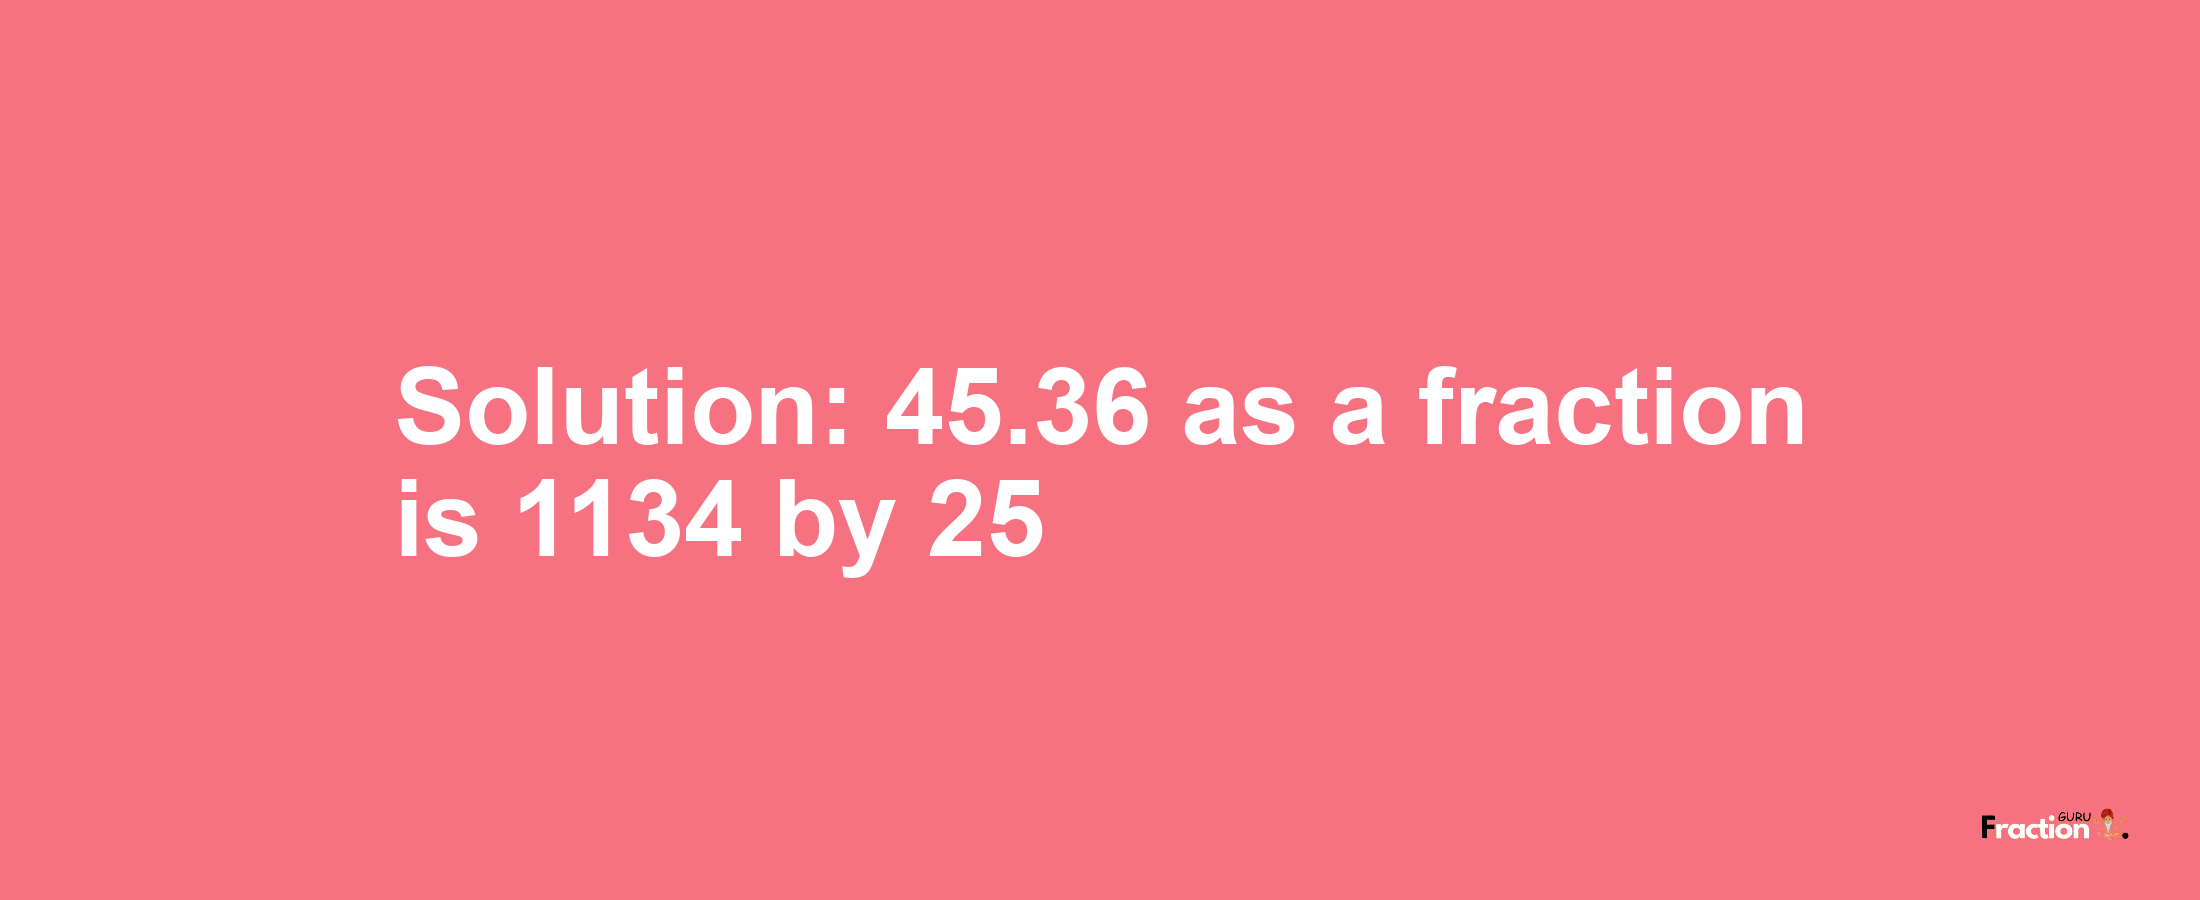 Solution:45.36 as a fraction is 1134/25